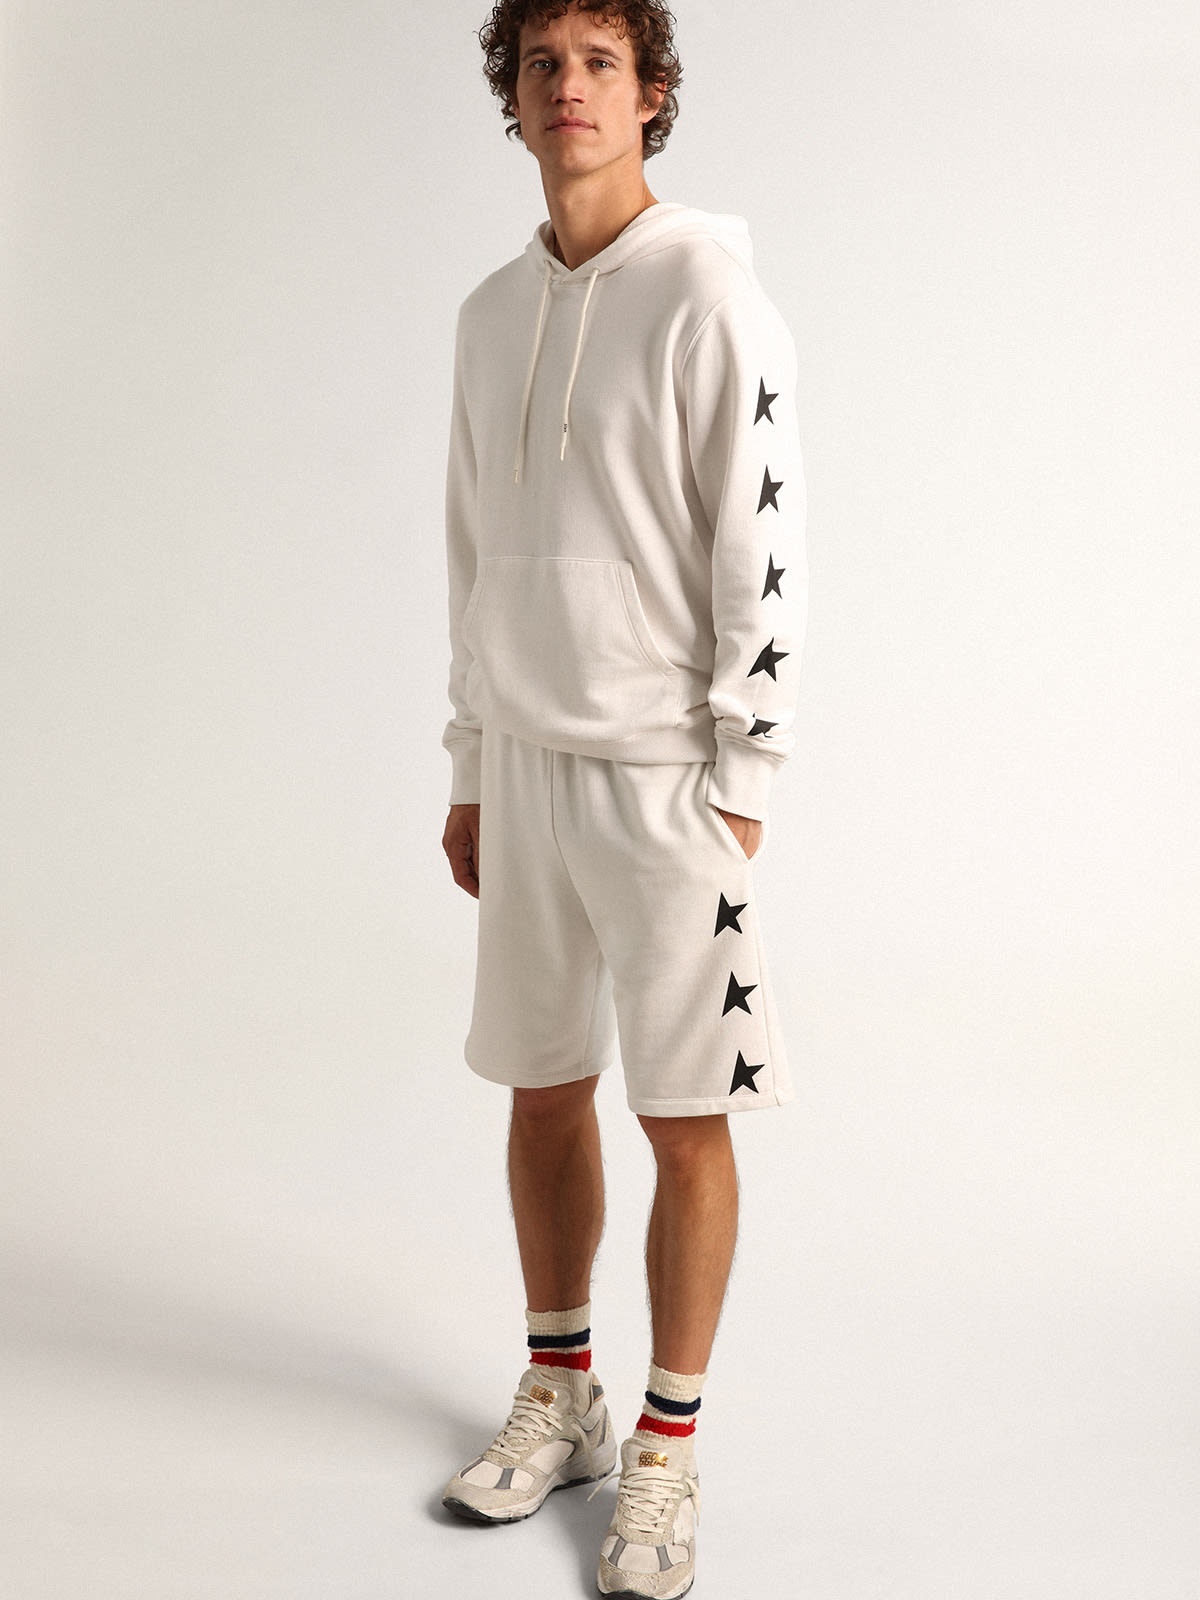 Alighiero Star Collection hooded sweatshirt in vintage white with contrasting black stars - 3